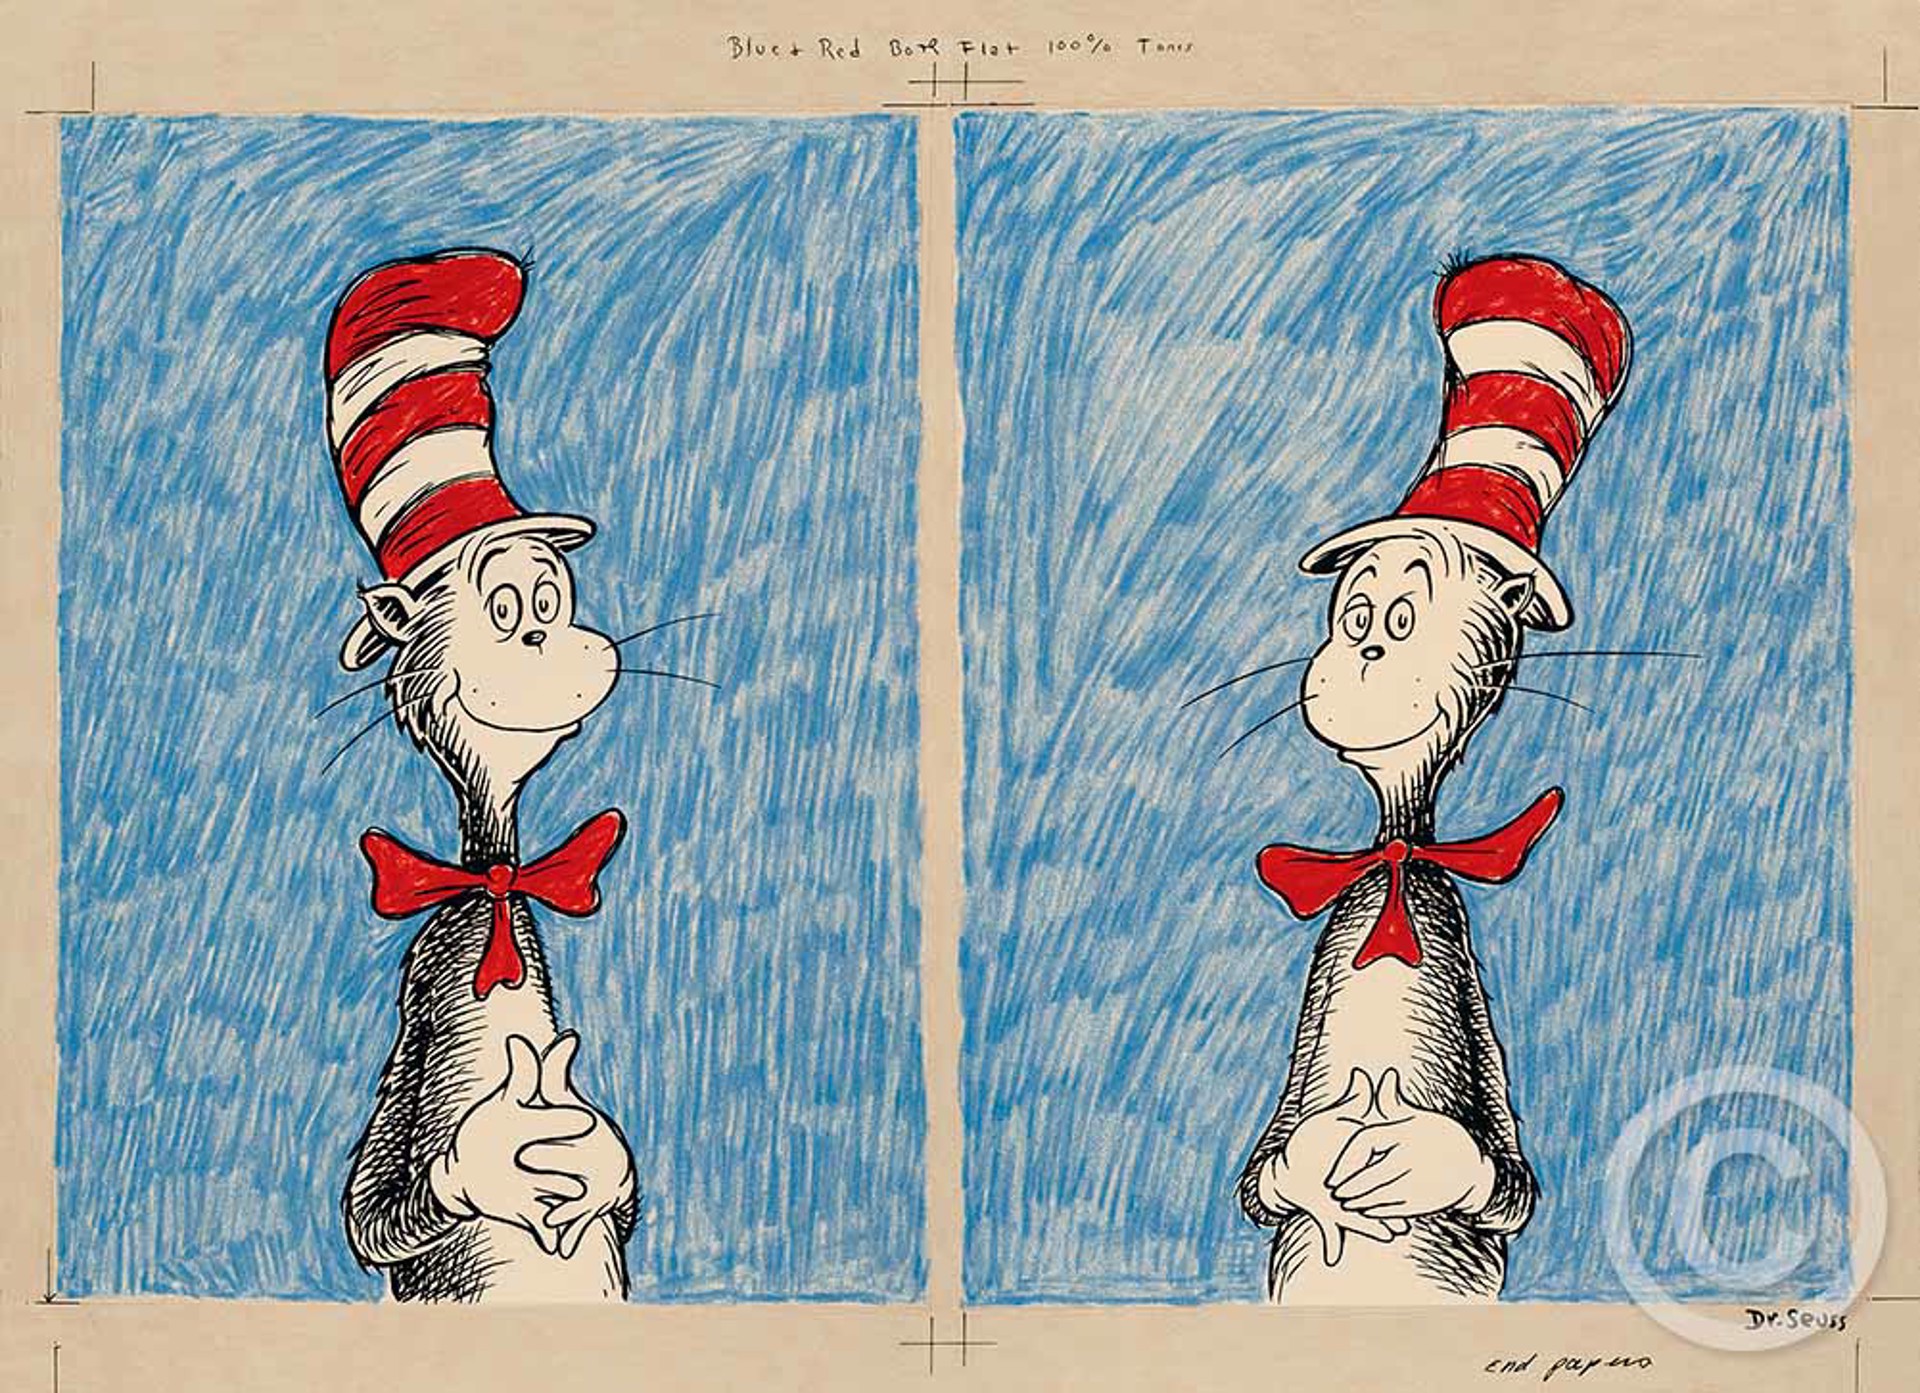 The Cat's Debut (Diptych) by Dr. Seuss